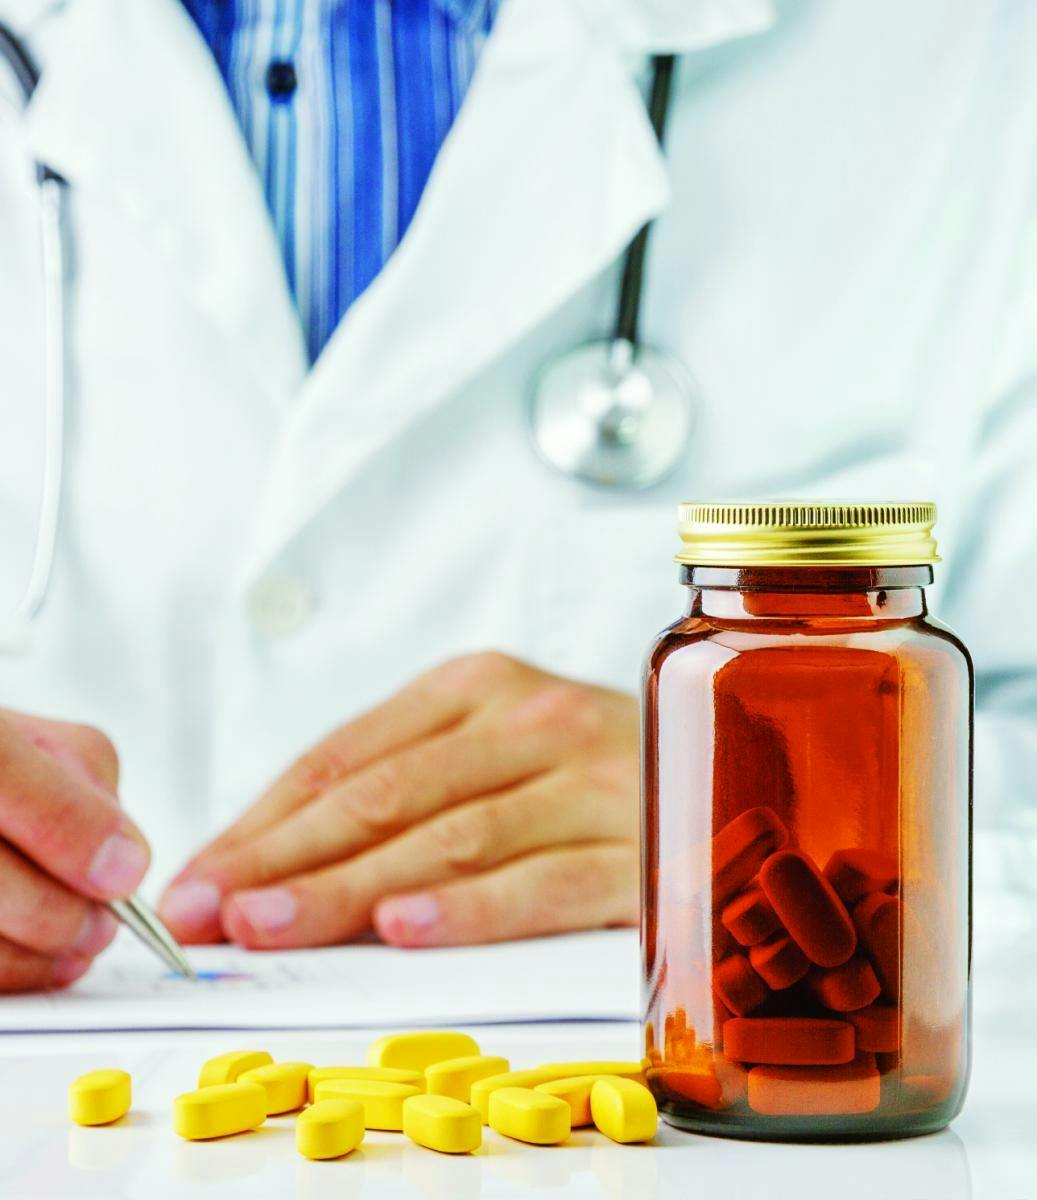 How the Healthcare Professional Evaluates Dietary Supplements